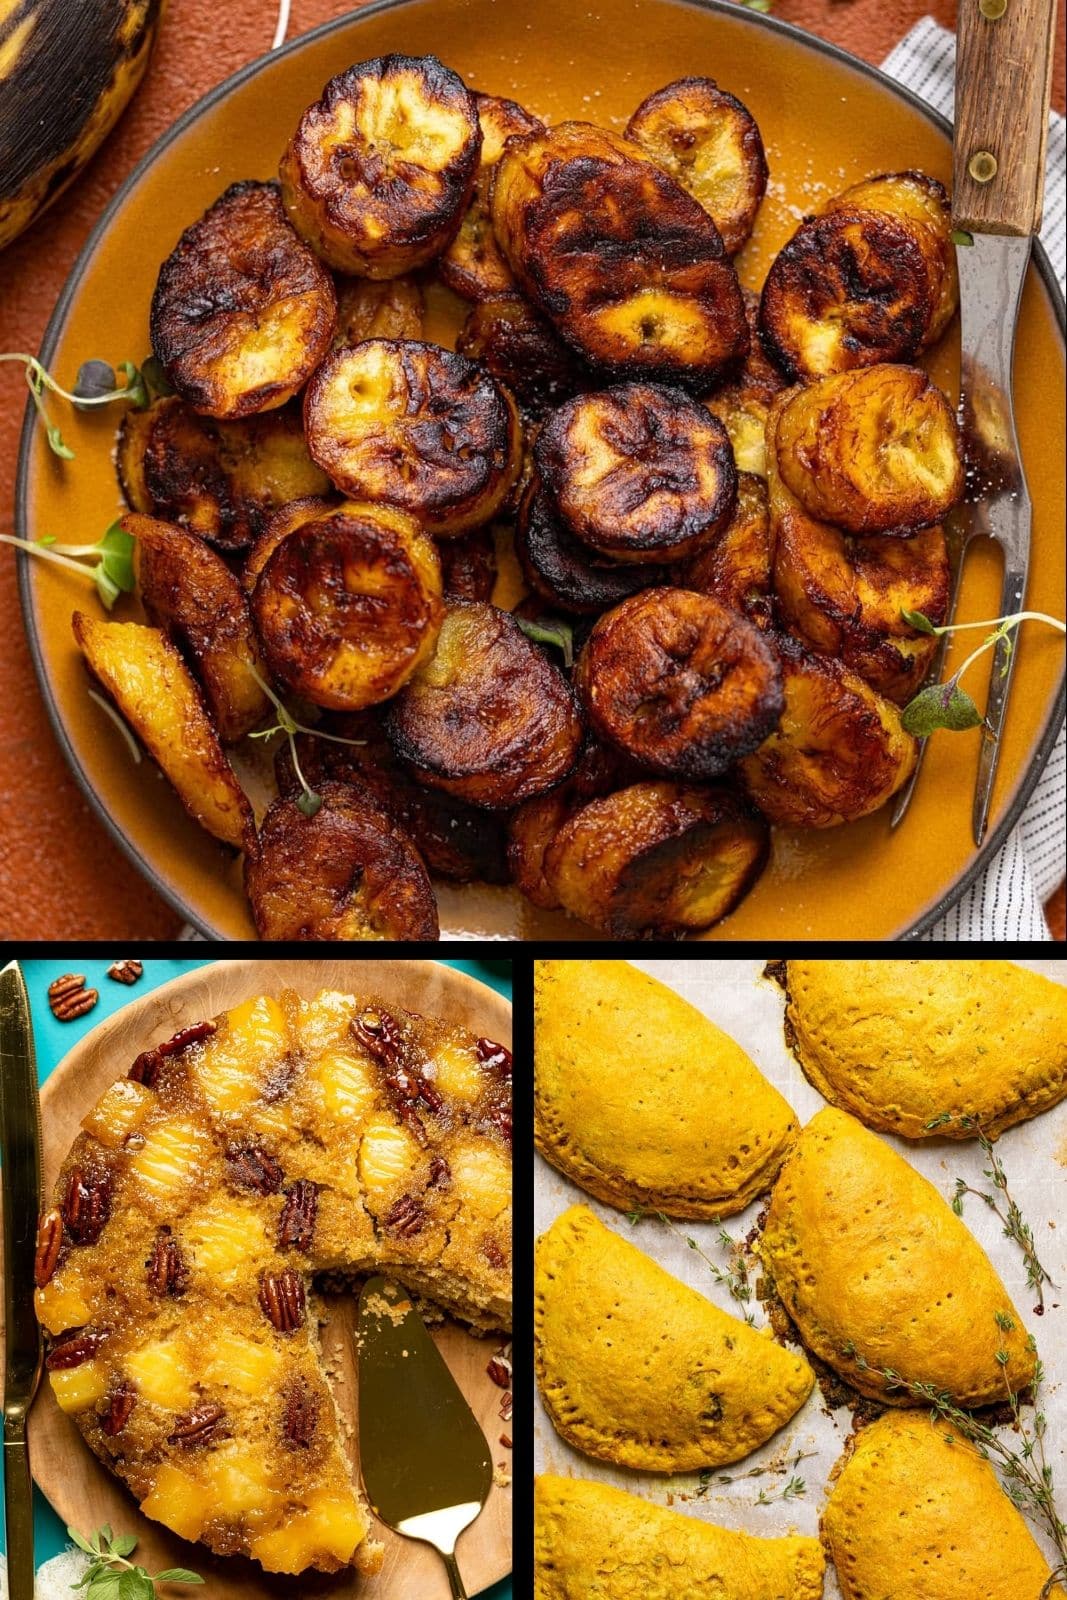 Collage of Jamaican recipes within post.